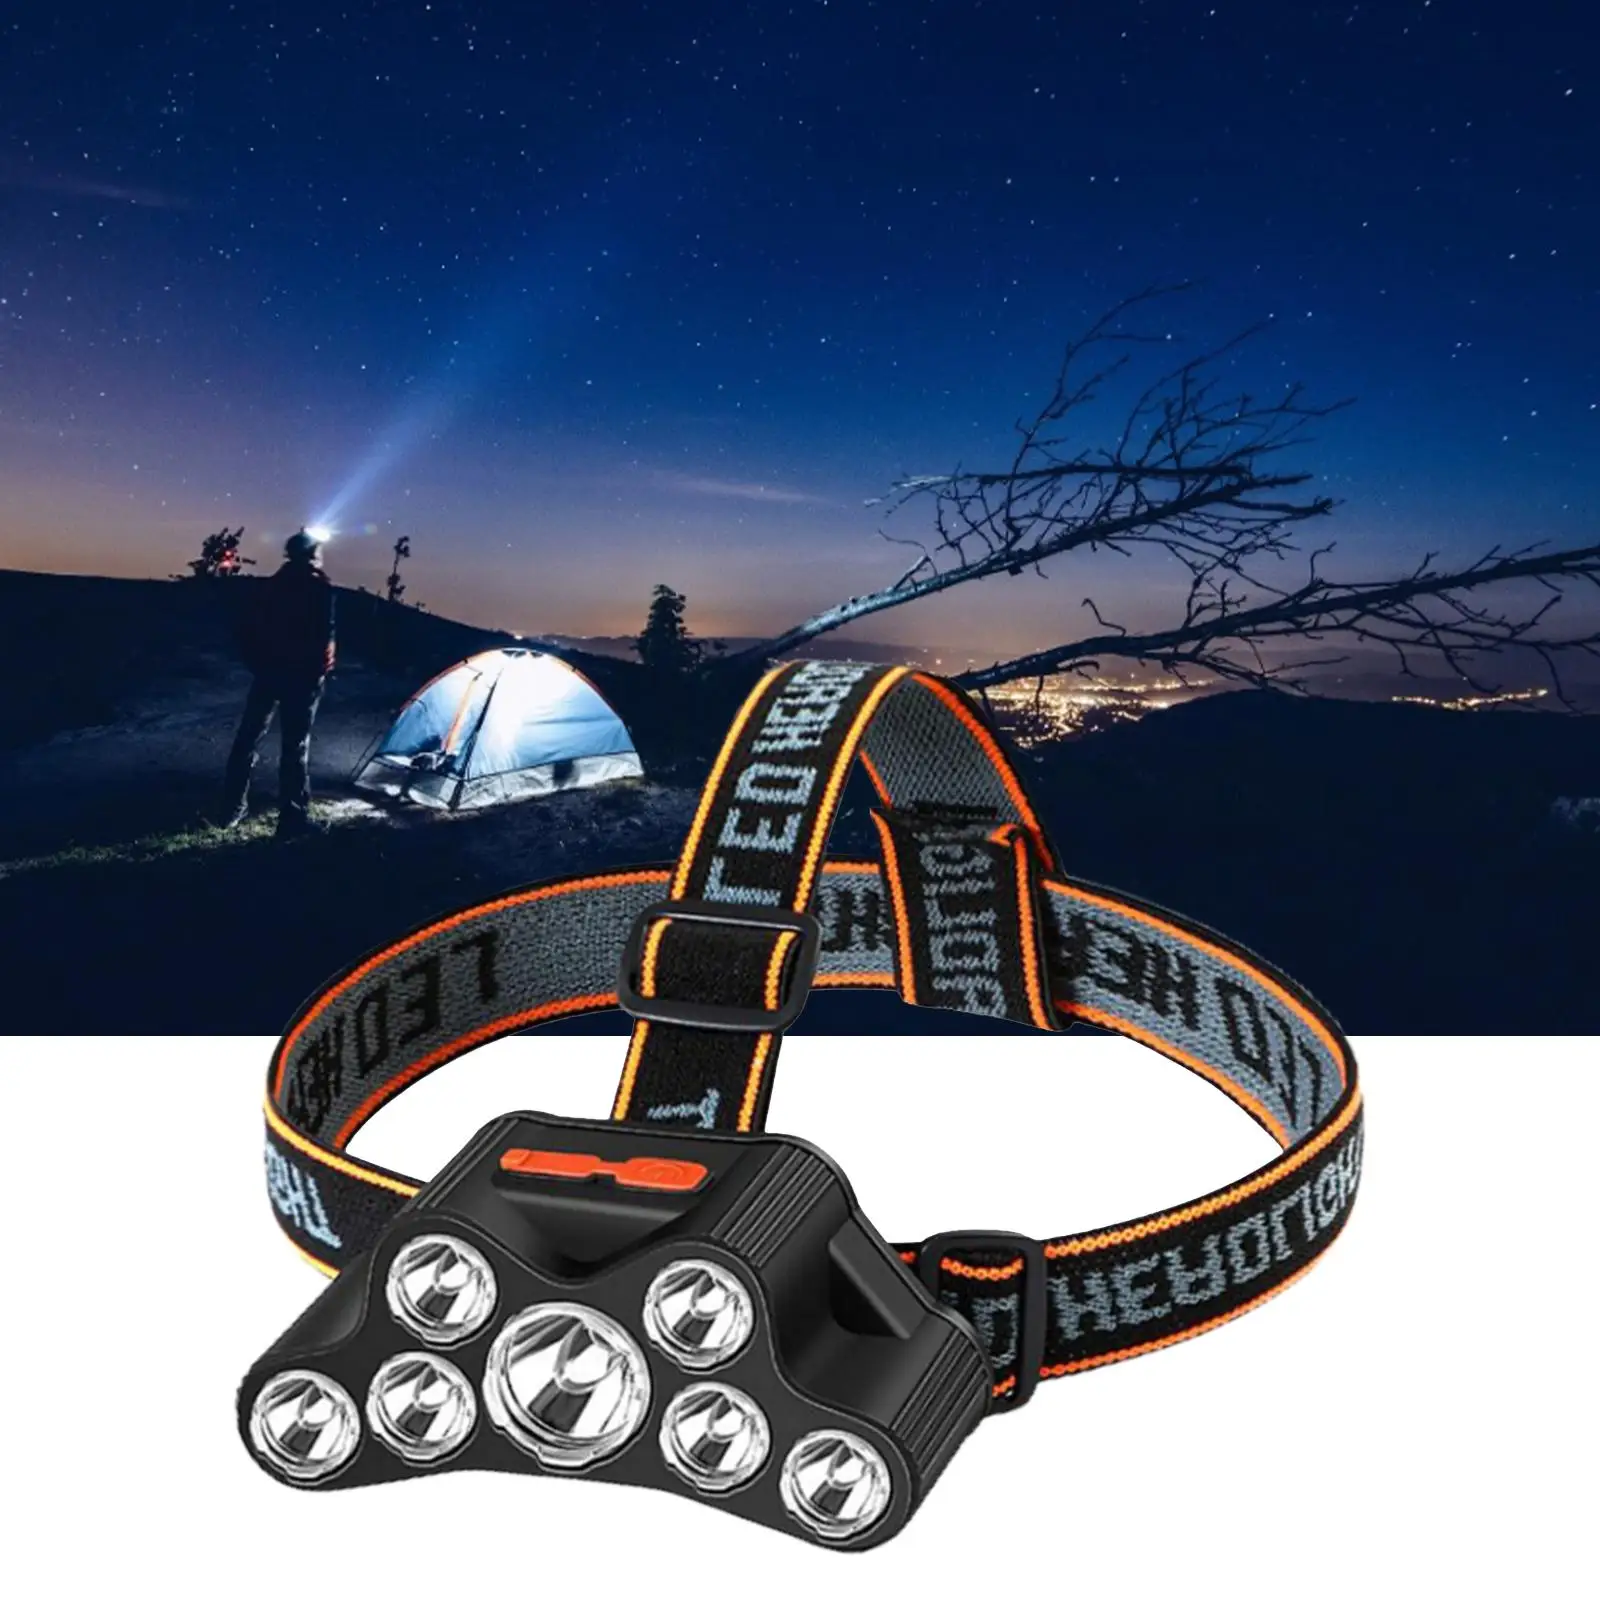 LED Headlamp Waterproof Hands-Free 90 Degrees Rotate USB Rechargeable Head Lamp for Outdoor Hiking Jogging with USB Line Lantern